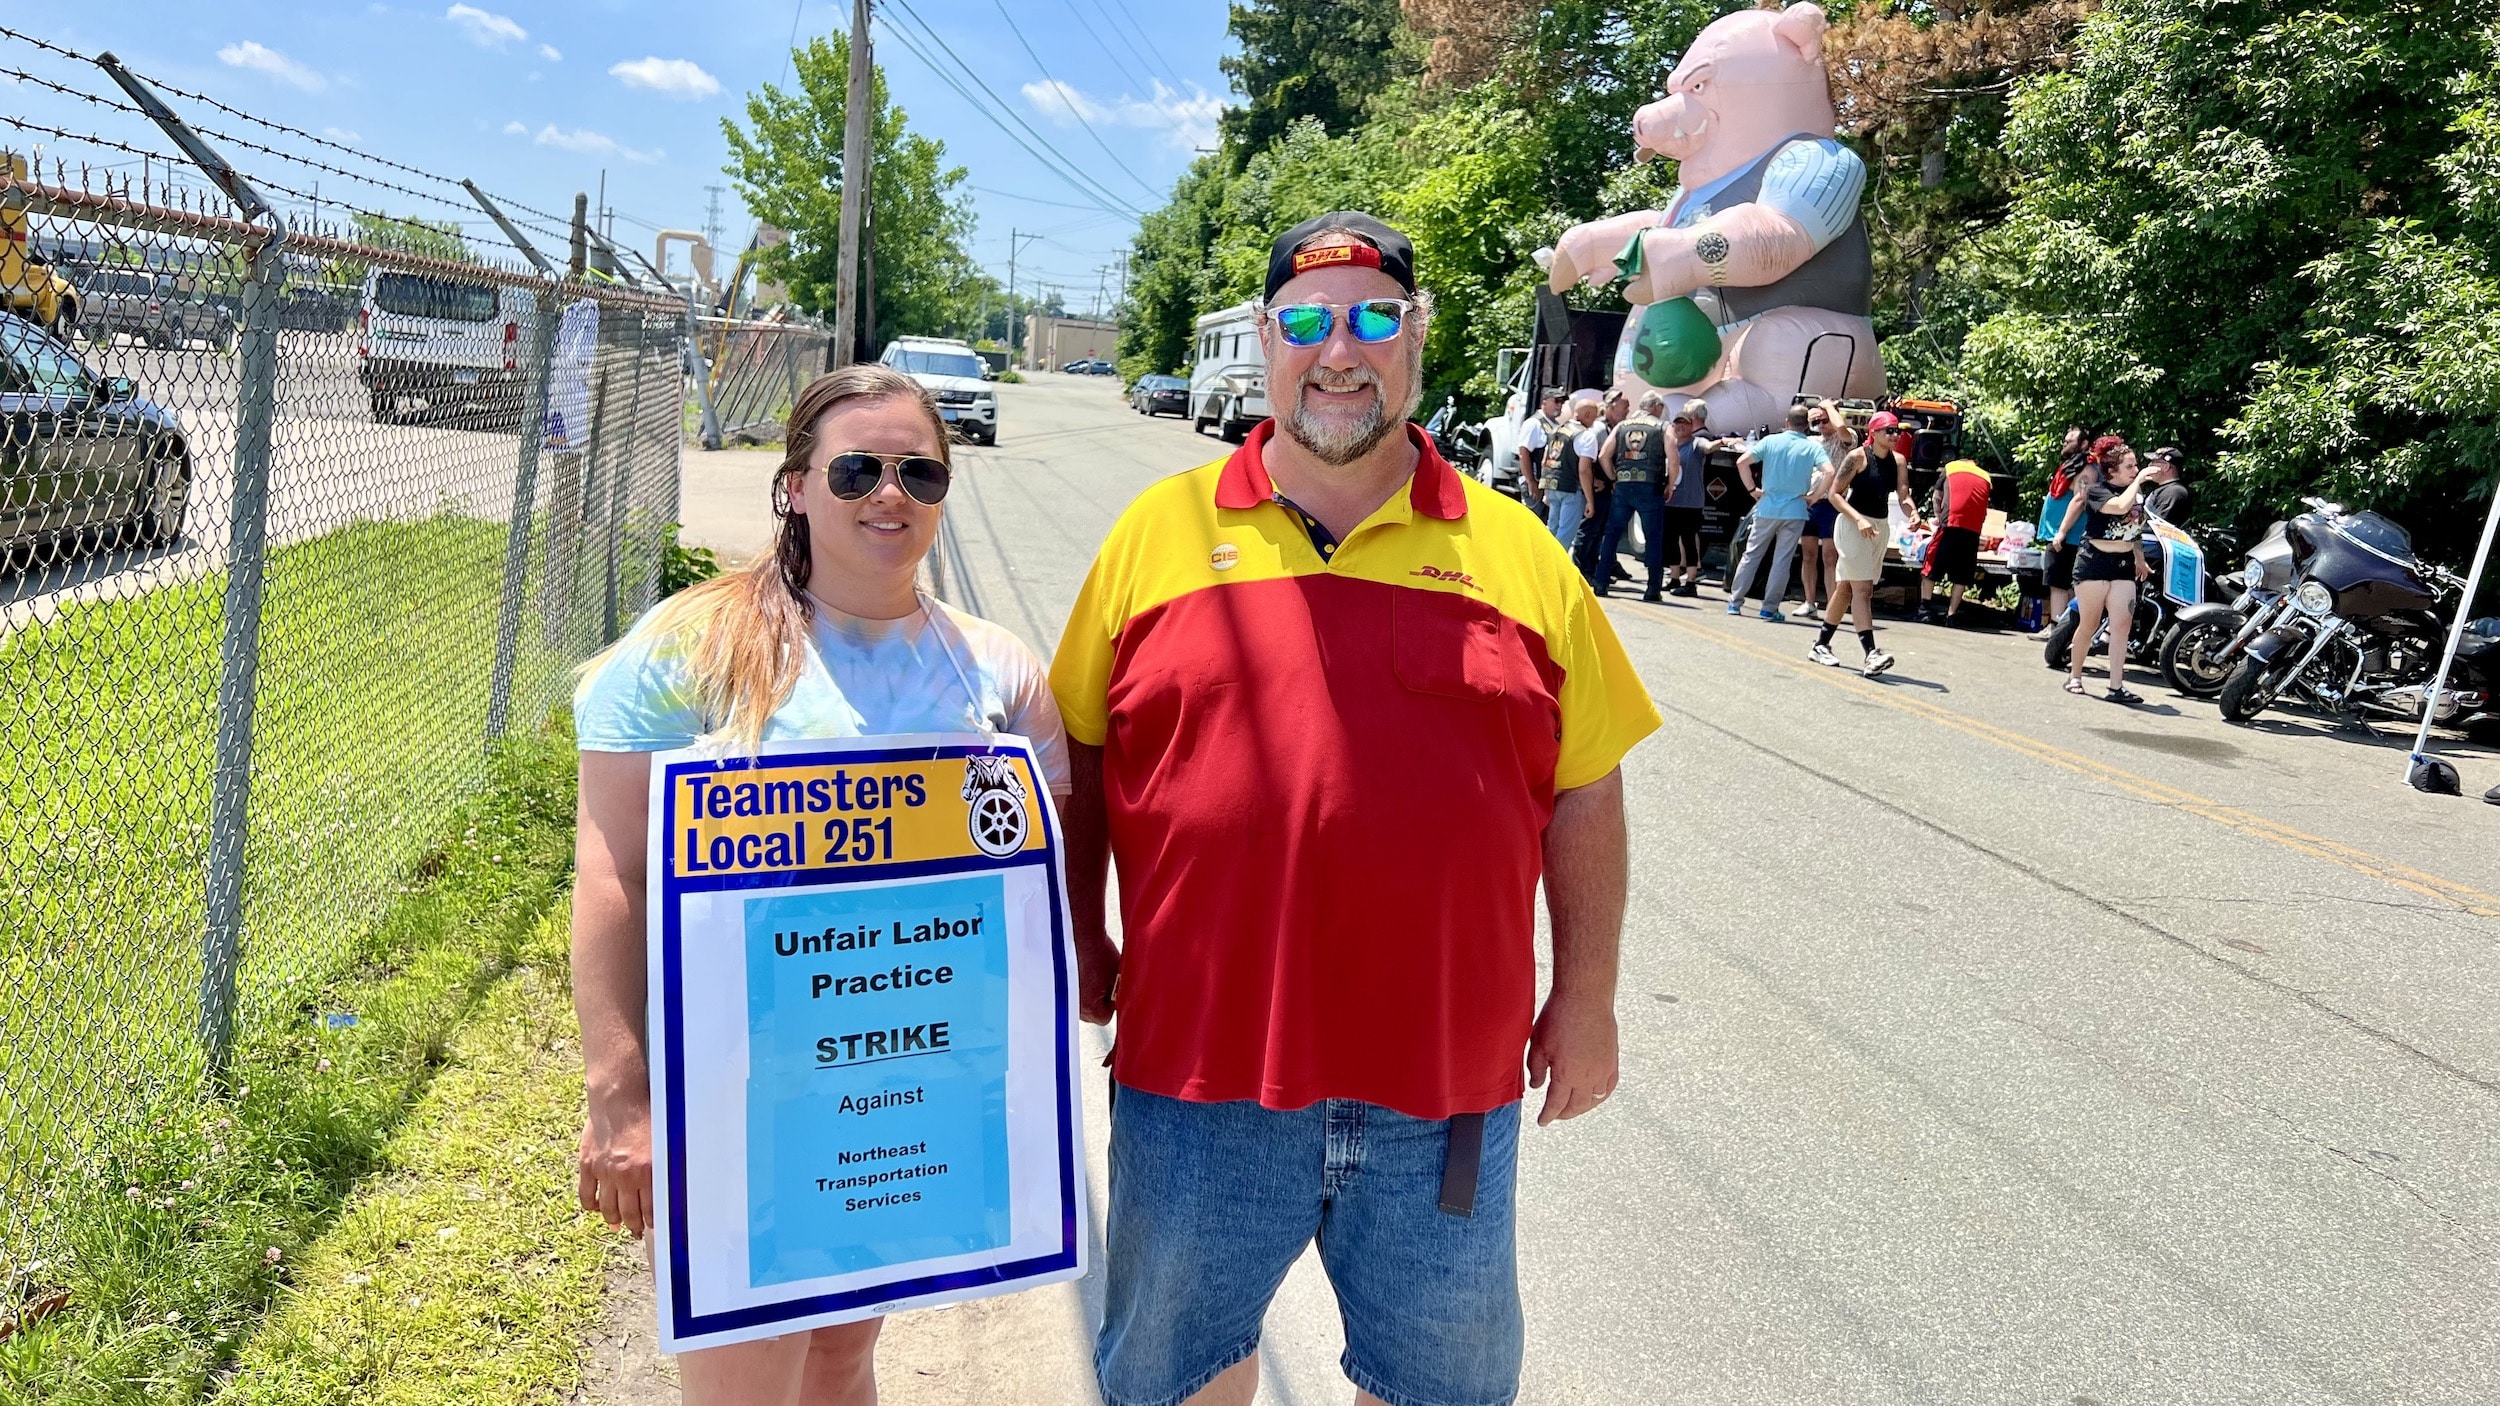 Rhode Island Workers Strike to Protect and Expand Rights and Benefits